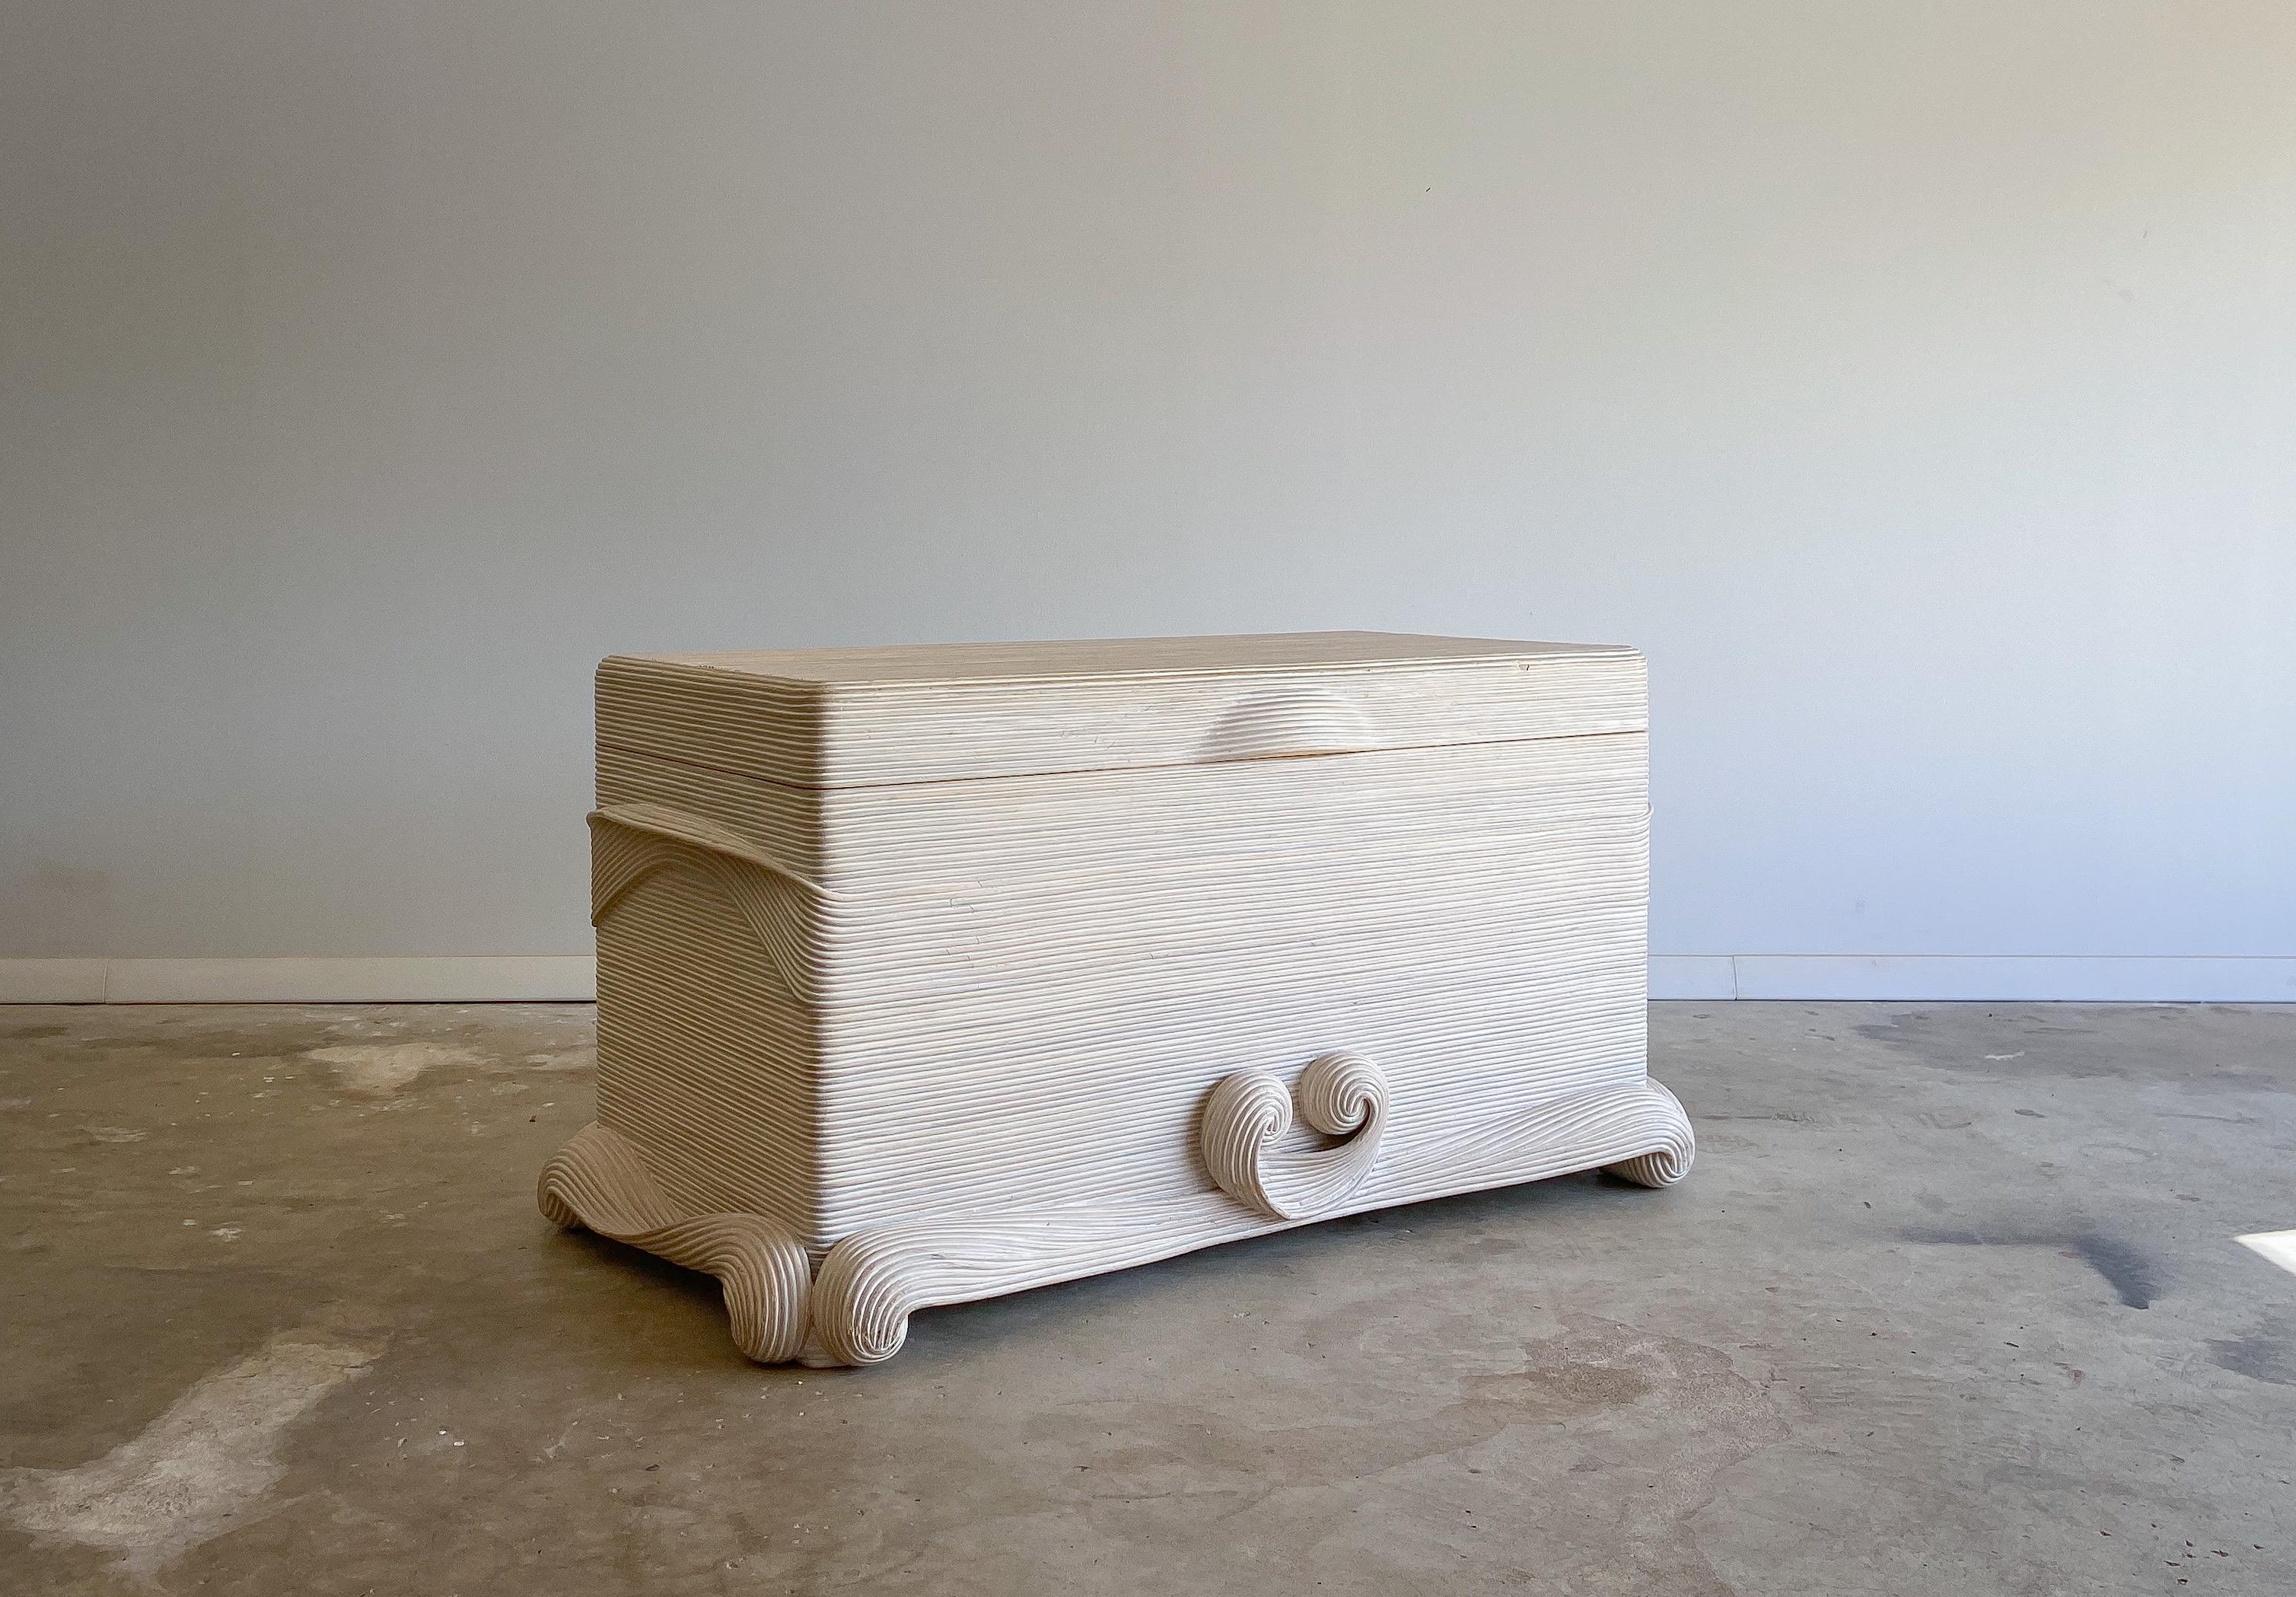 Offered is a lovely sculptural split reed storage chest/trunk designed by Betty Cobonpue for her 